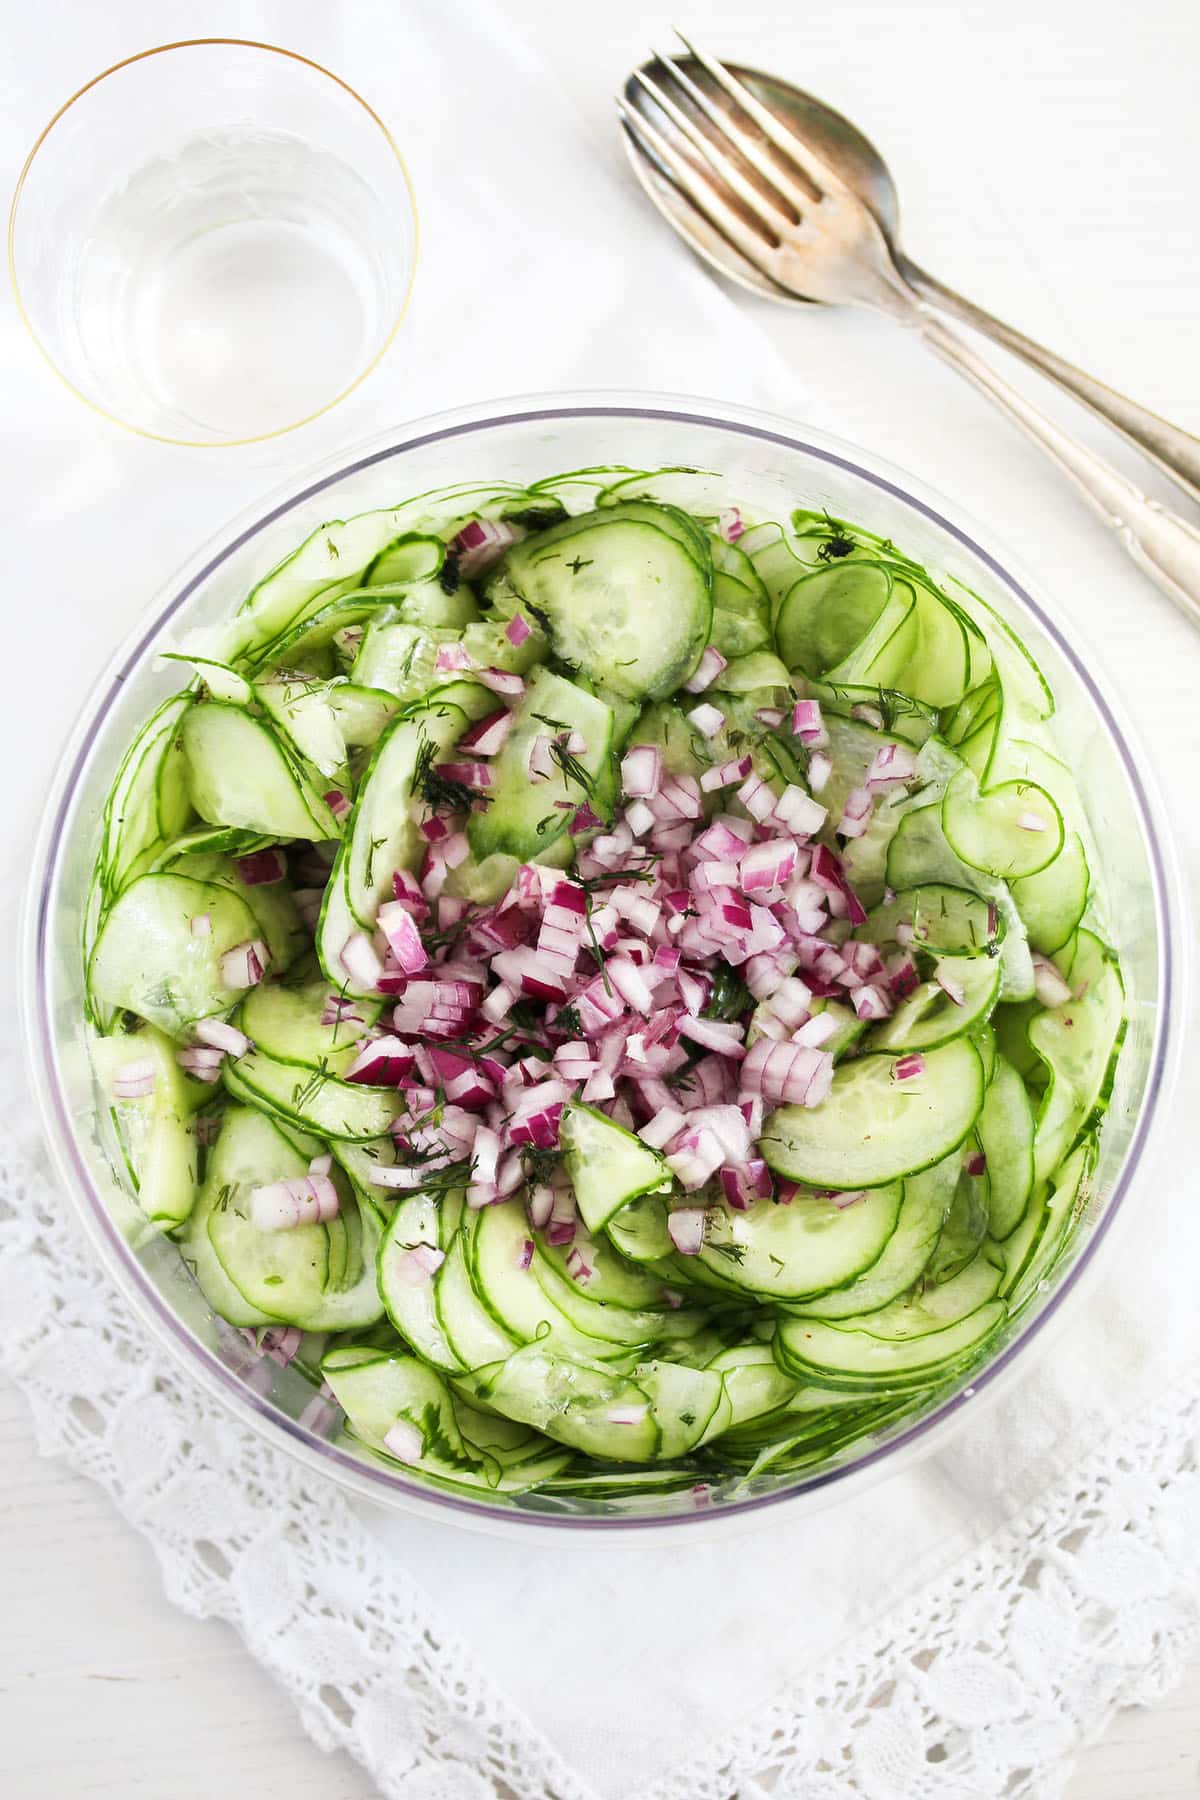 cucumber salad with red onions and vinaigrette in a bowl, a fork and spoon on the side.